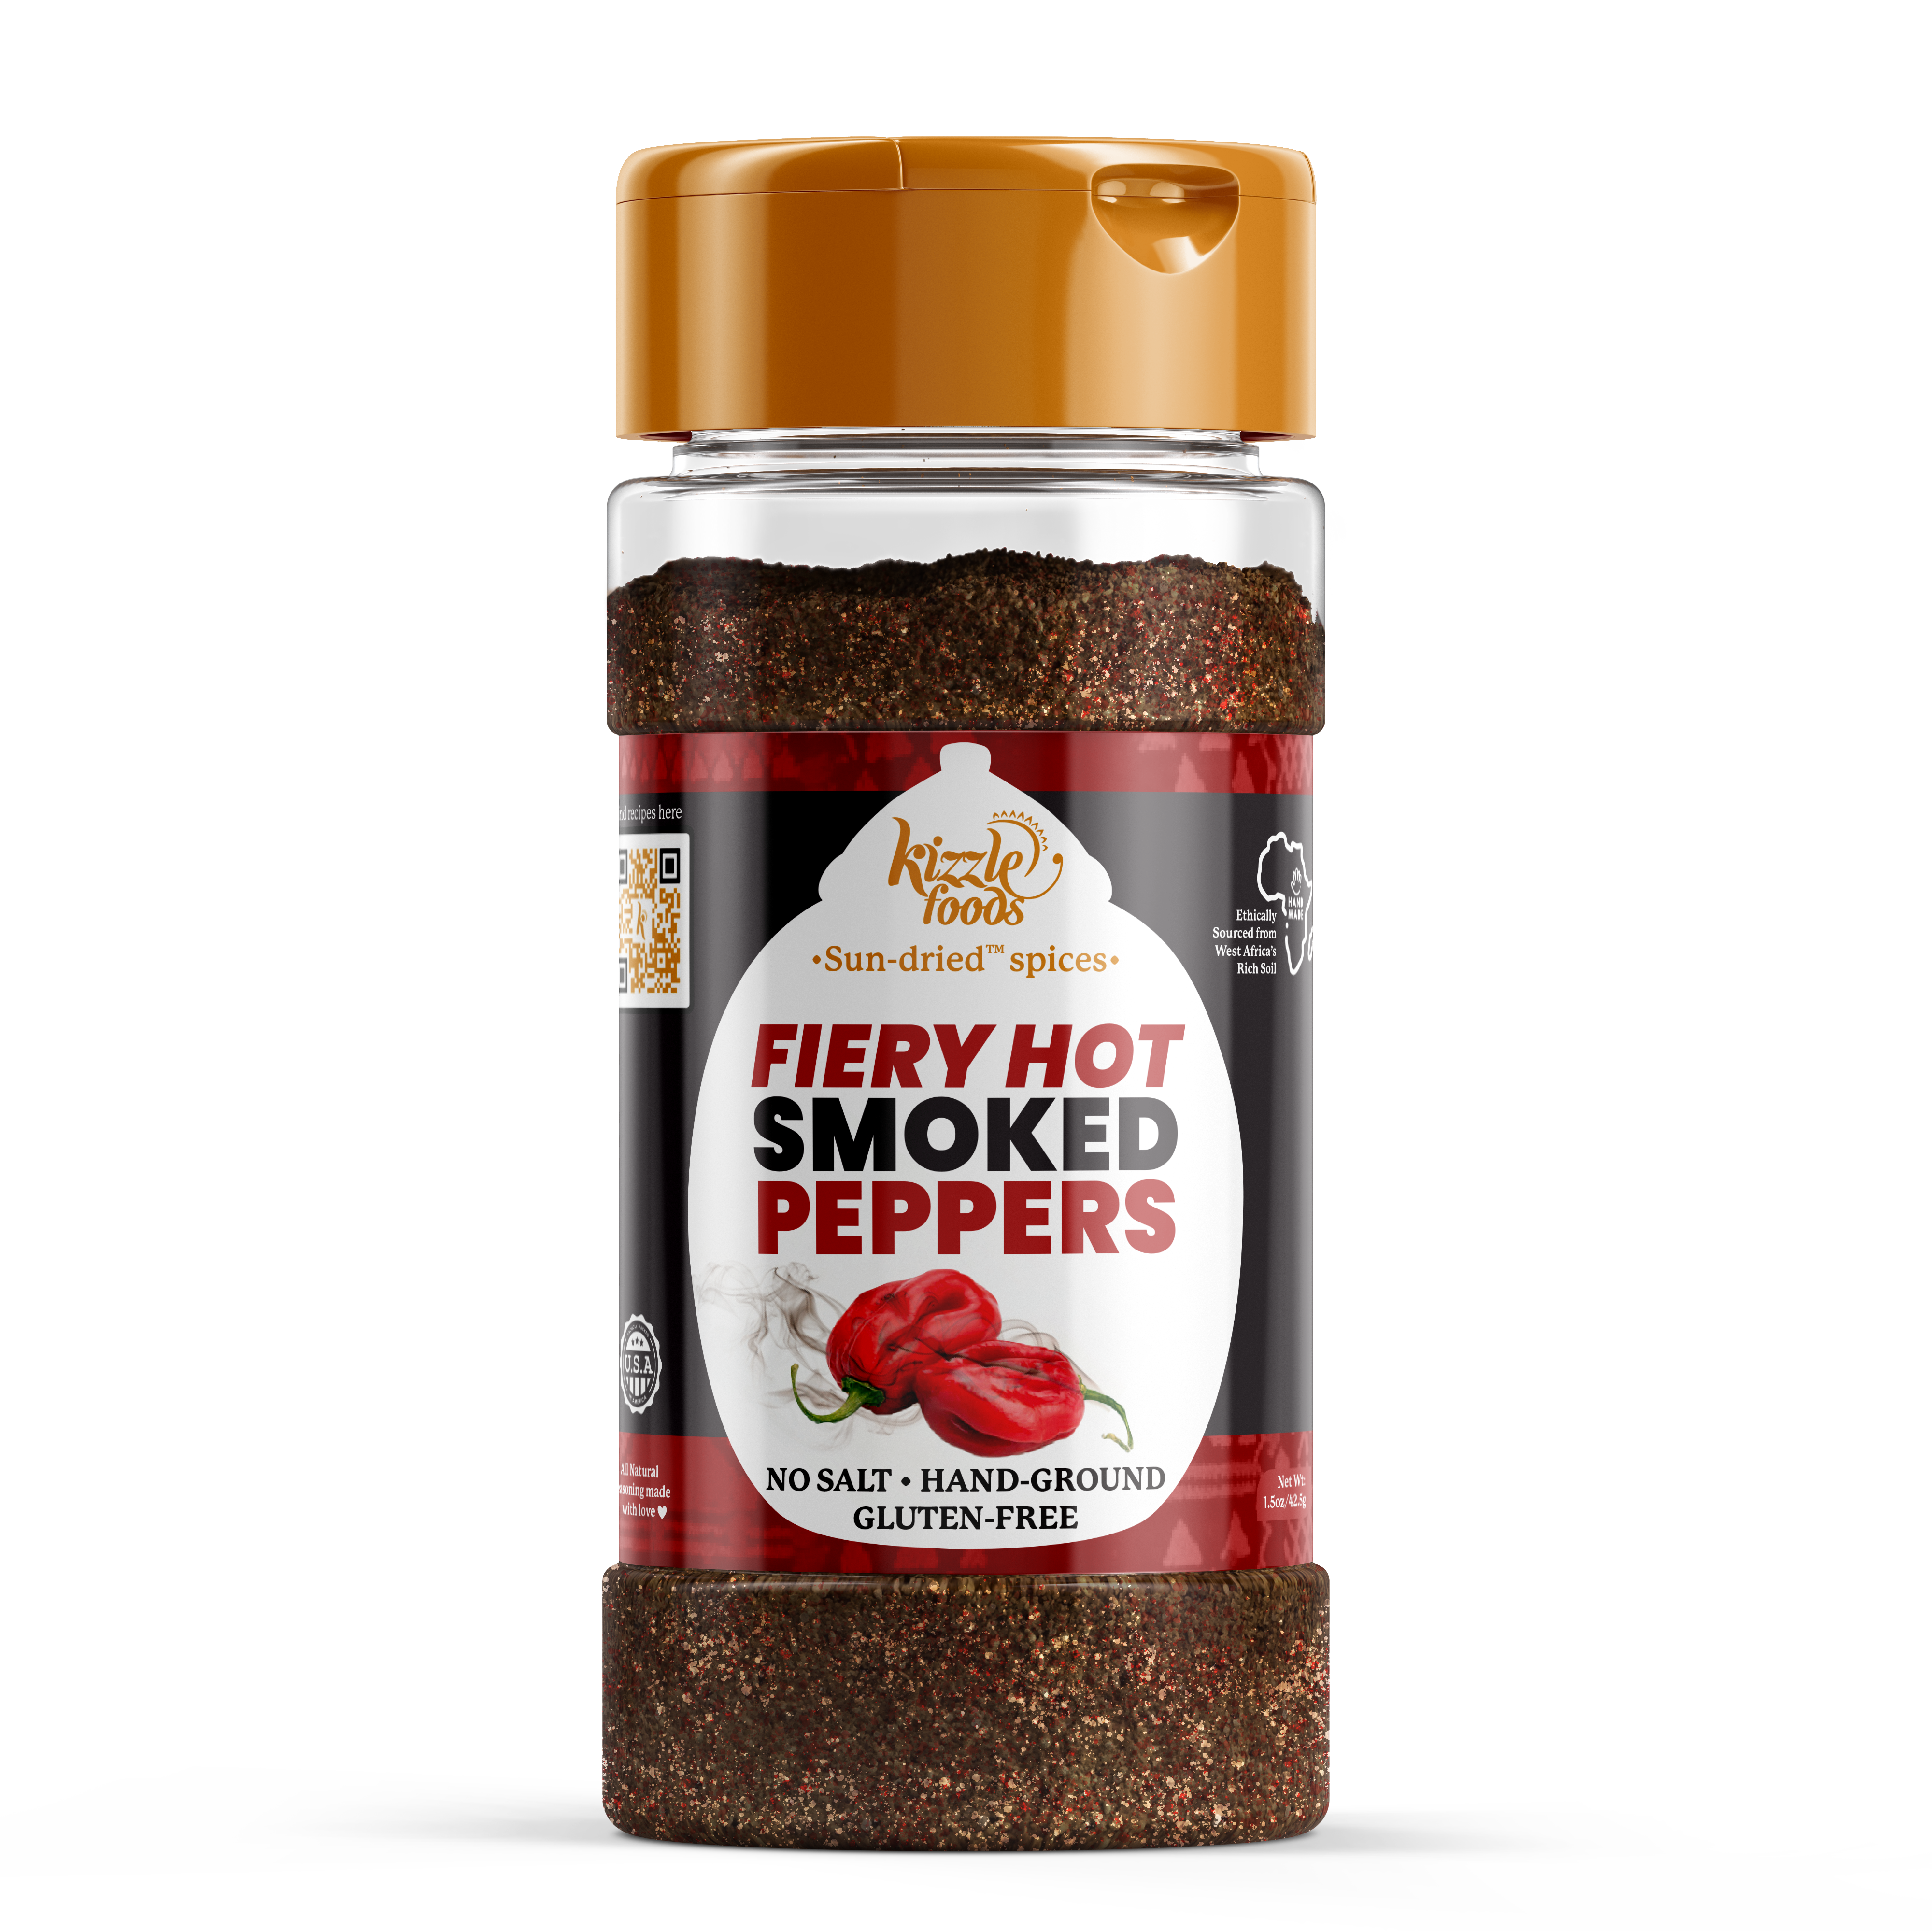 KizzleFoods Fiery HOT, Smoked Peppers 3.45 oz